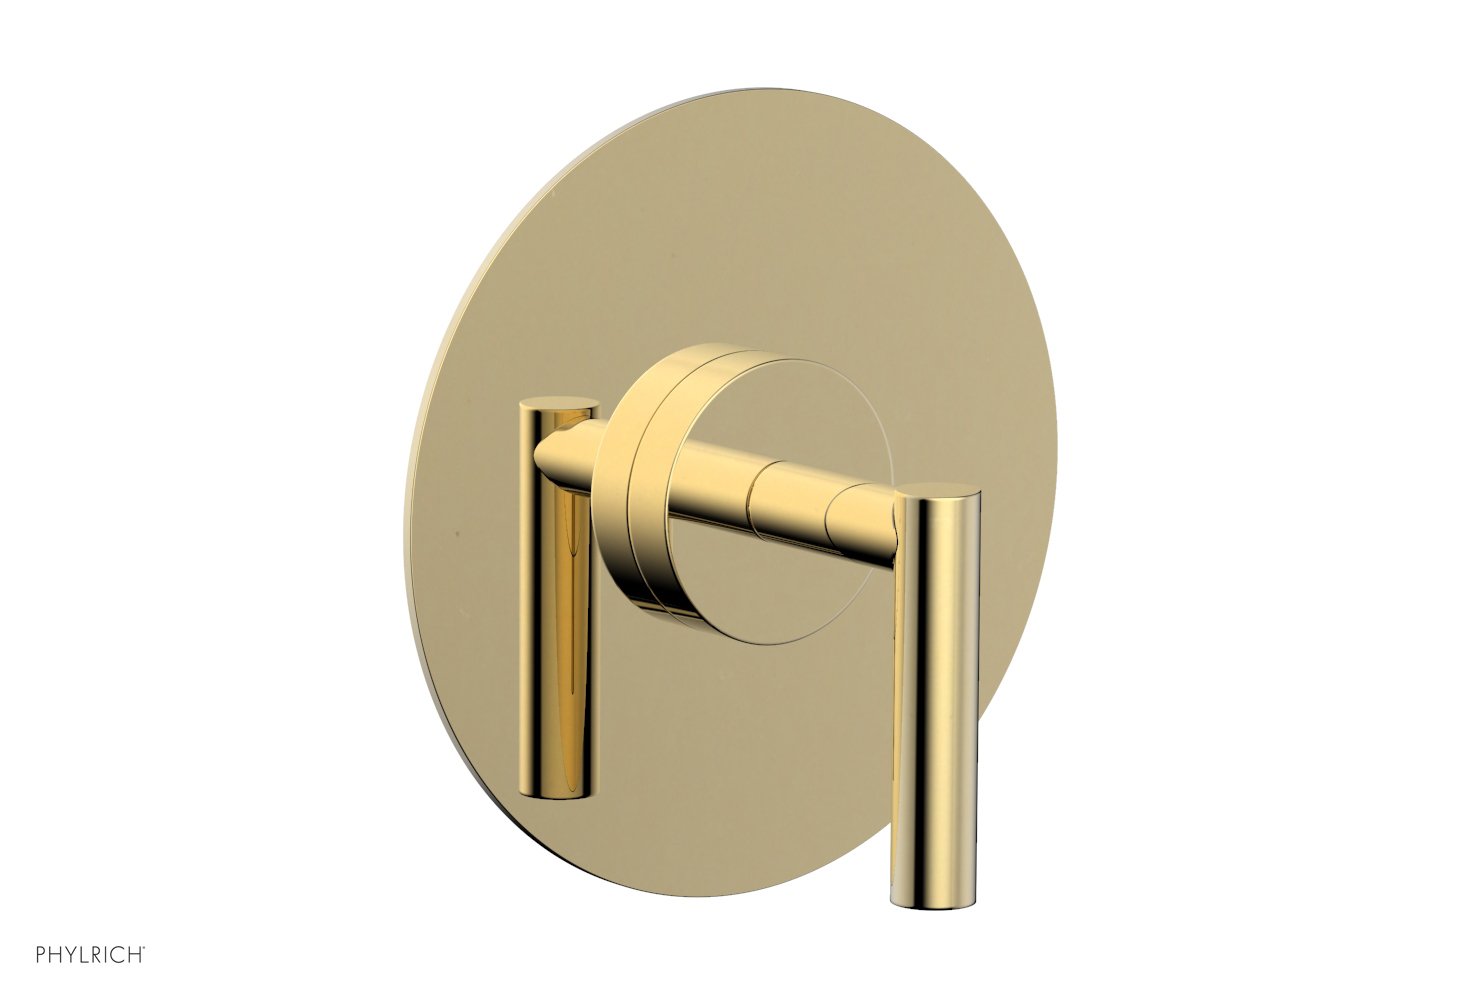 Phylrich TRANSITION 1/2" Thermostatic Shower Trim